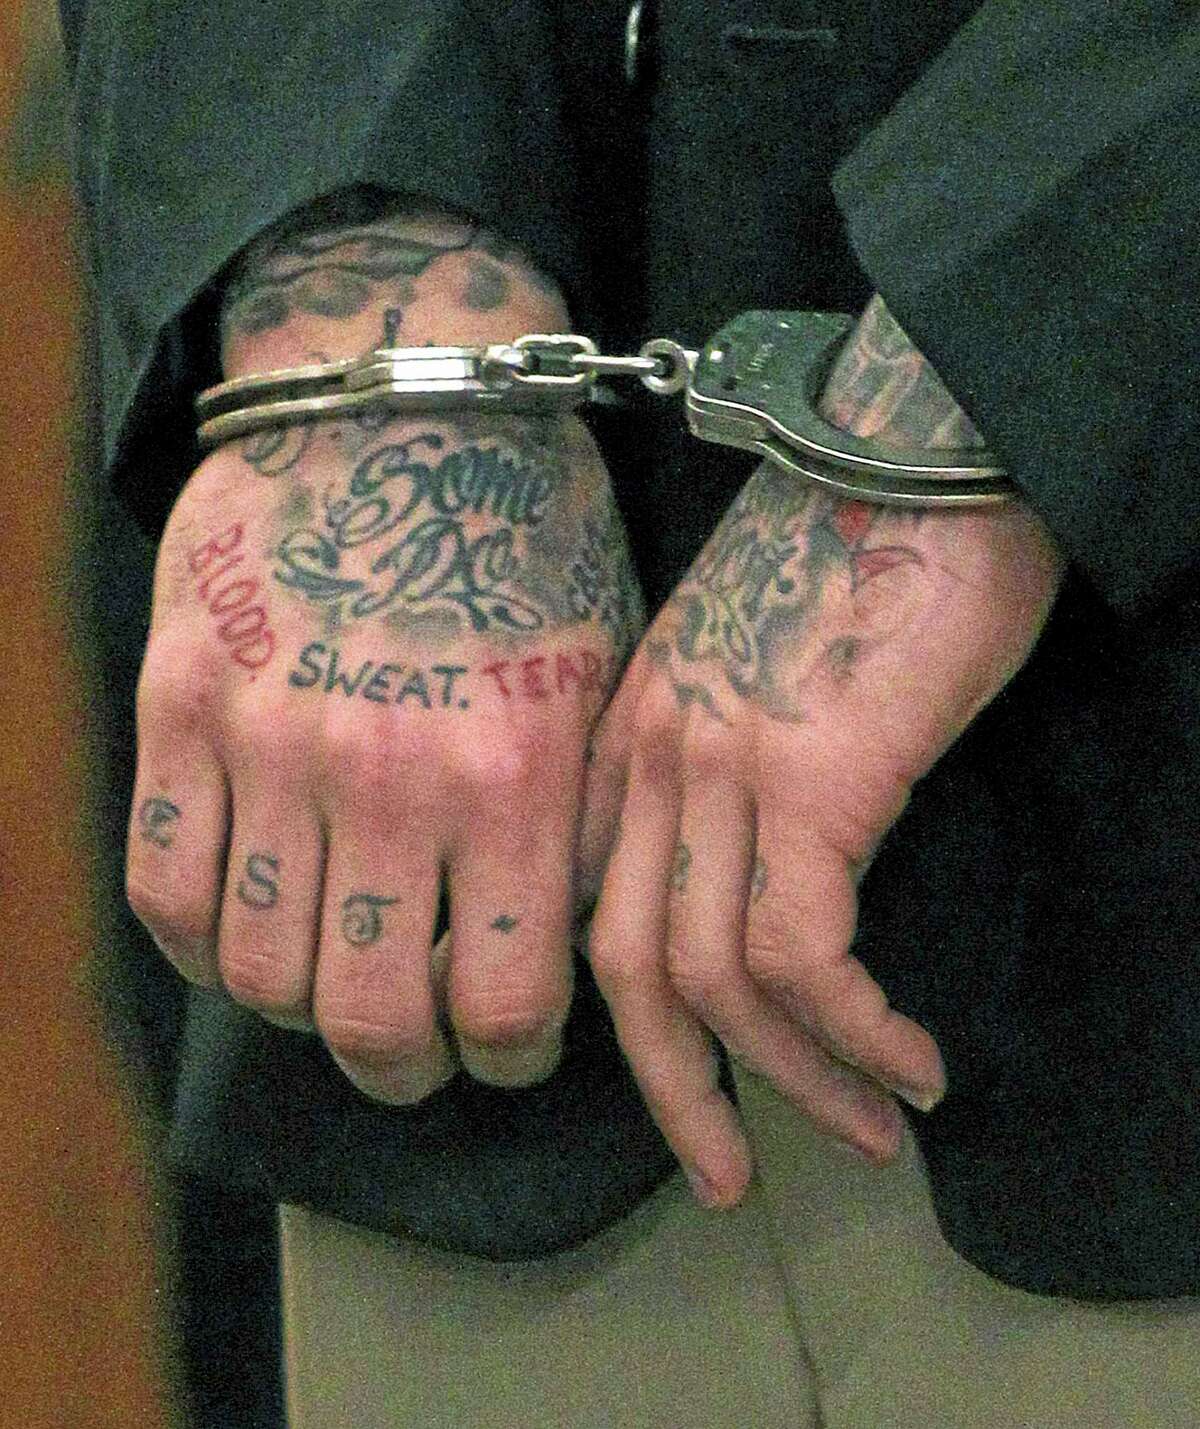 In this Dec. 23, 2013 file photo, former New England Patriots tight end Aaron Hernandez’s tattooed hands are secured with handcuffs as he arrives for his court appearance at Superior Court in Fall River, Massachusetts.